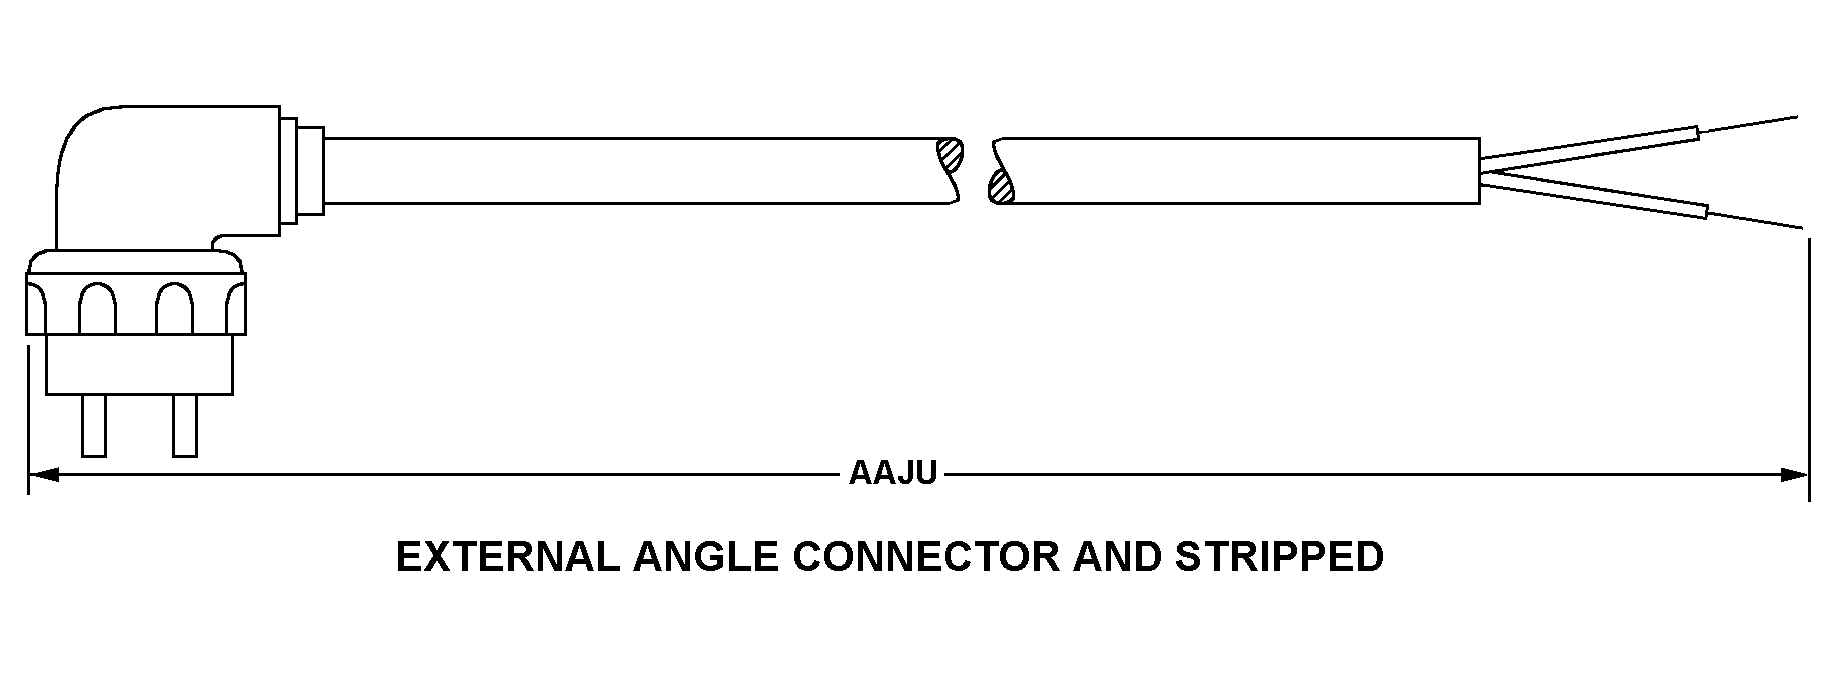 EXTERNAL ANGLE CONNECTOR AND STRIPPED style nsn 5995-01-091-0253